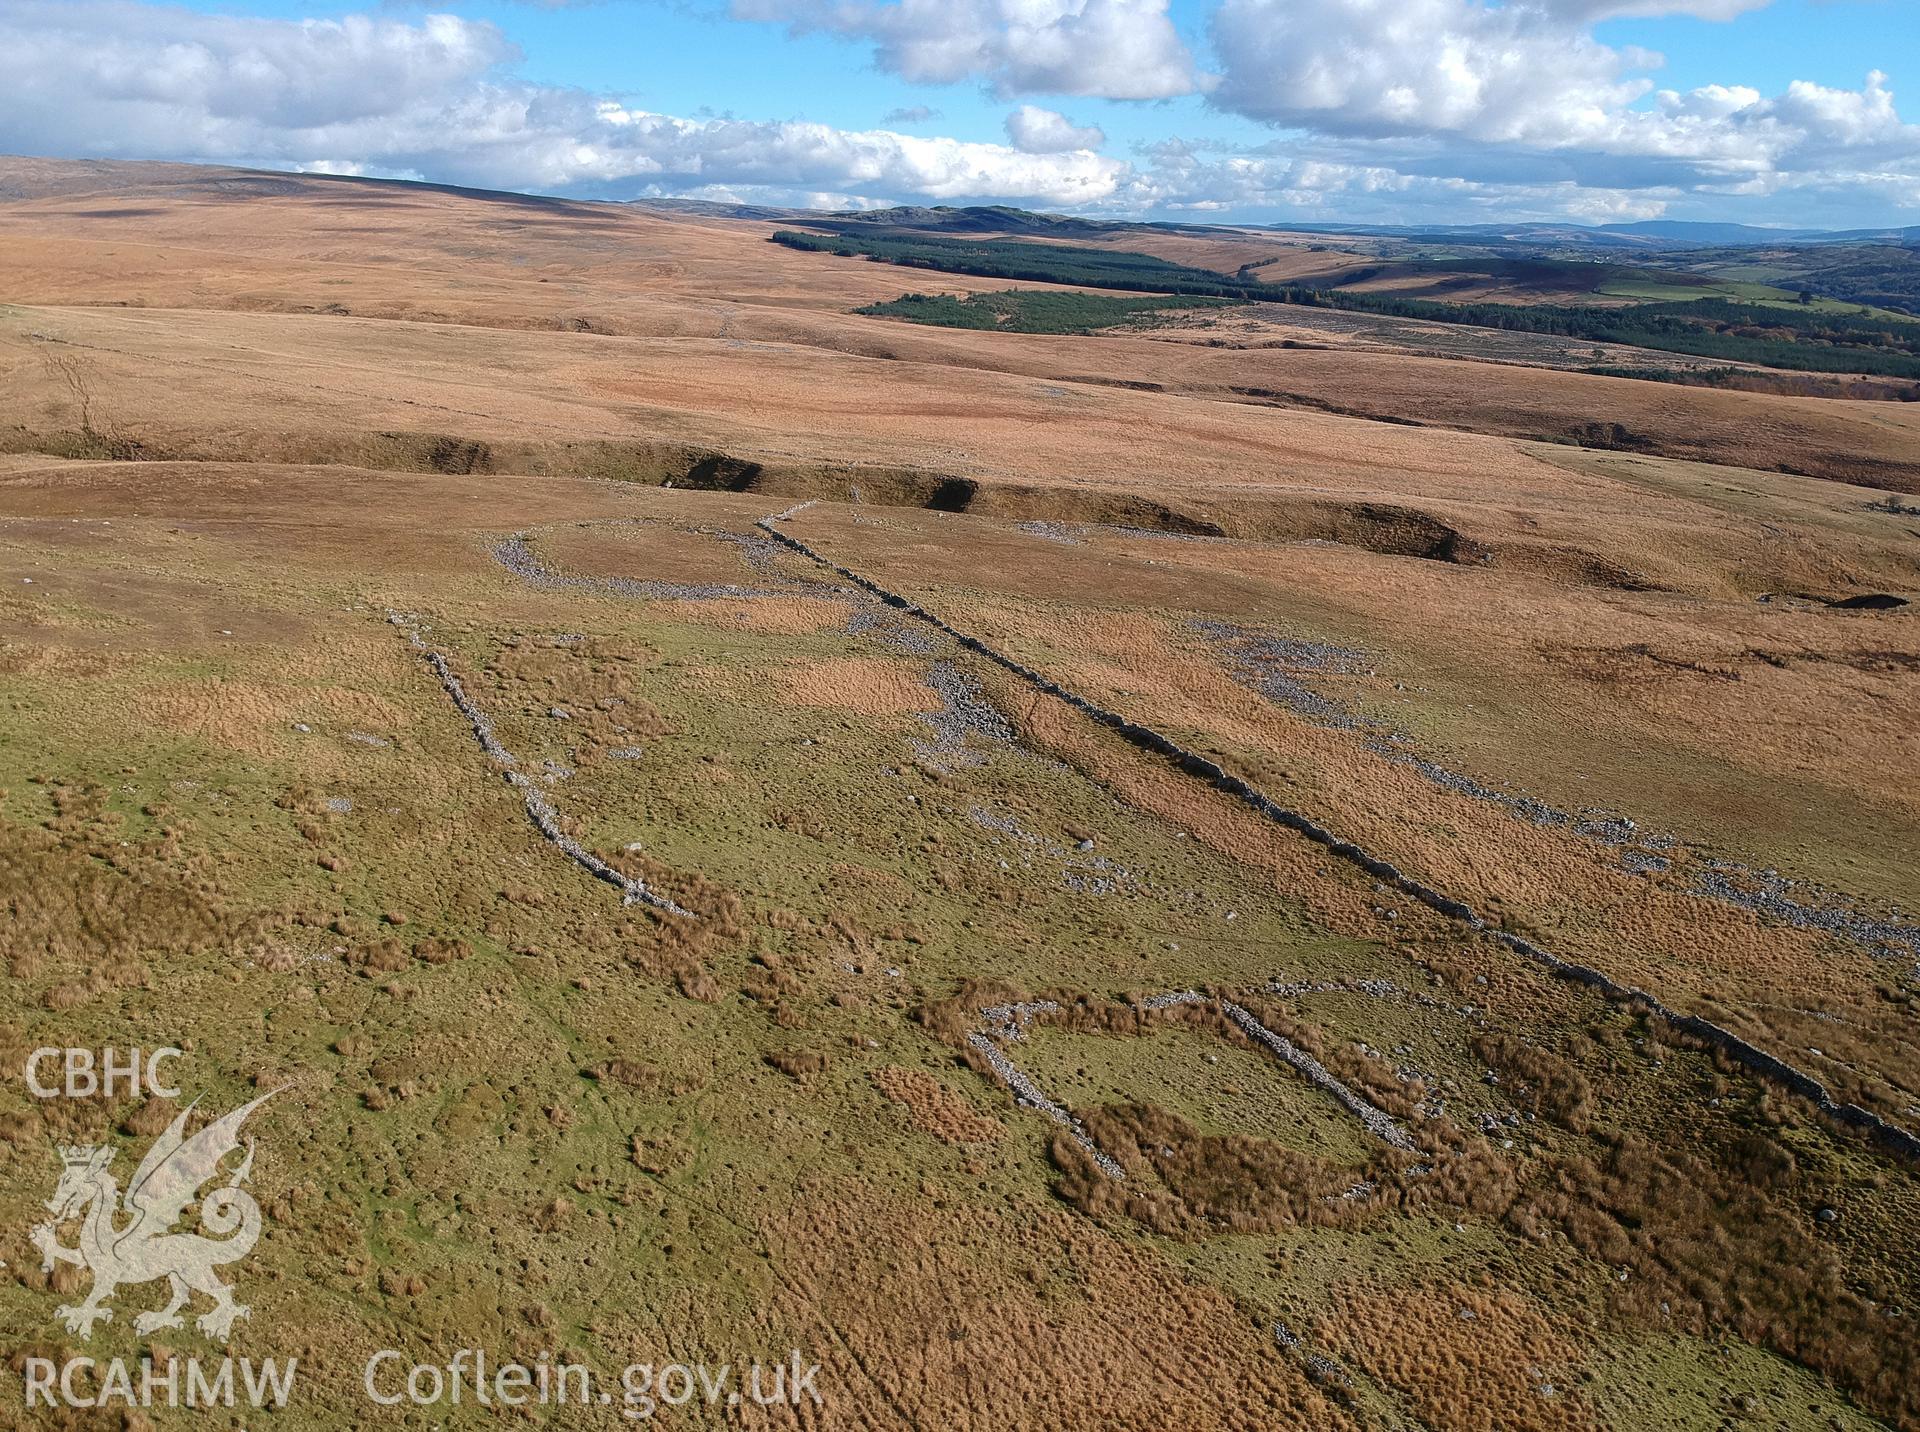 Aerial view of the Gwrs Fach enclosure group, north of Ystradgynlais. Colour photograph taken by Paul R. Davis on 1st November 2018.